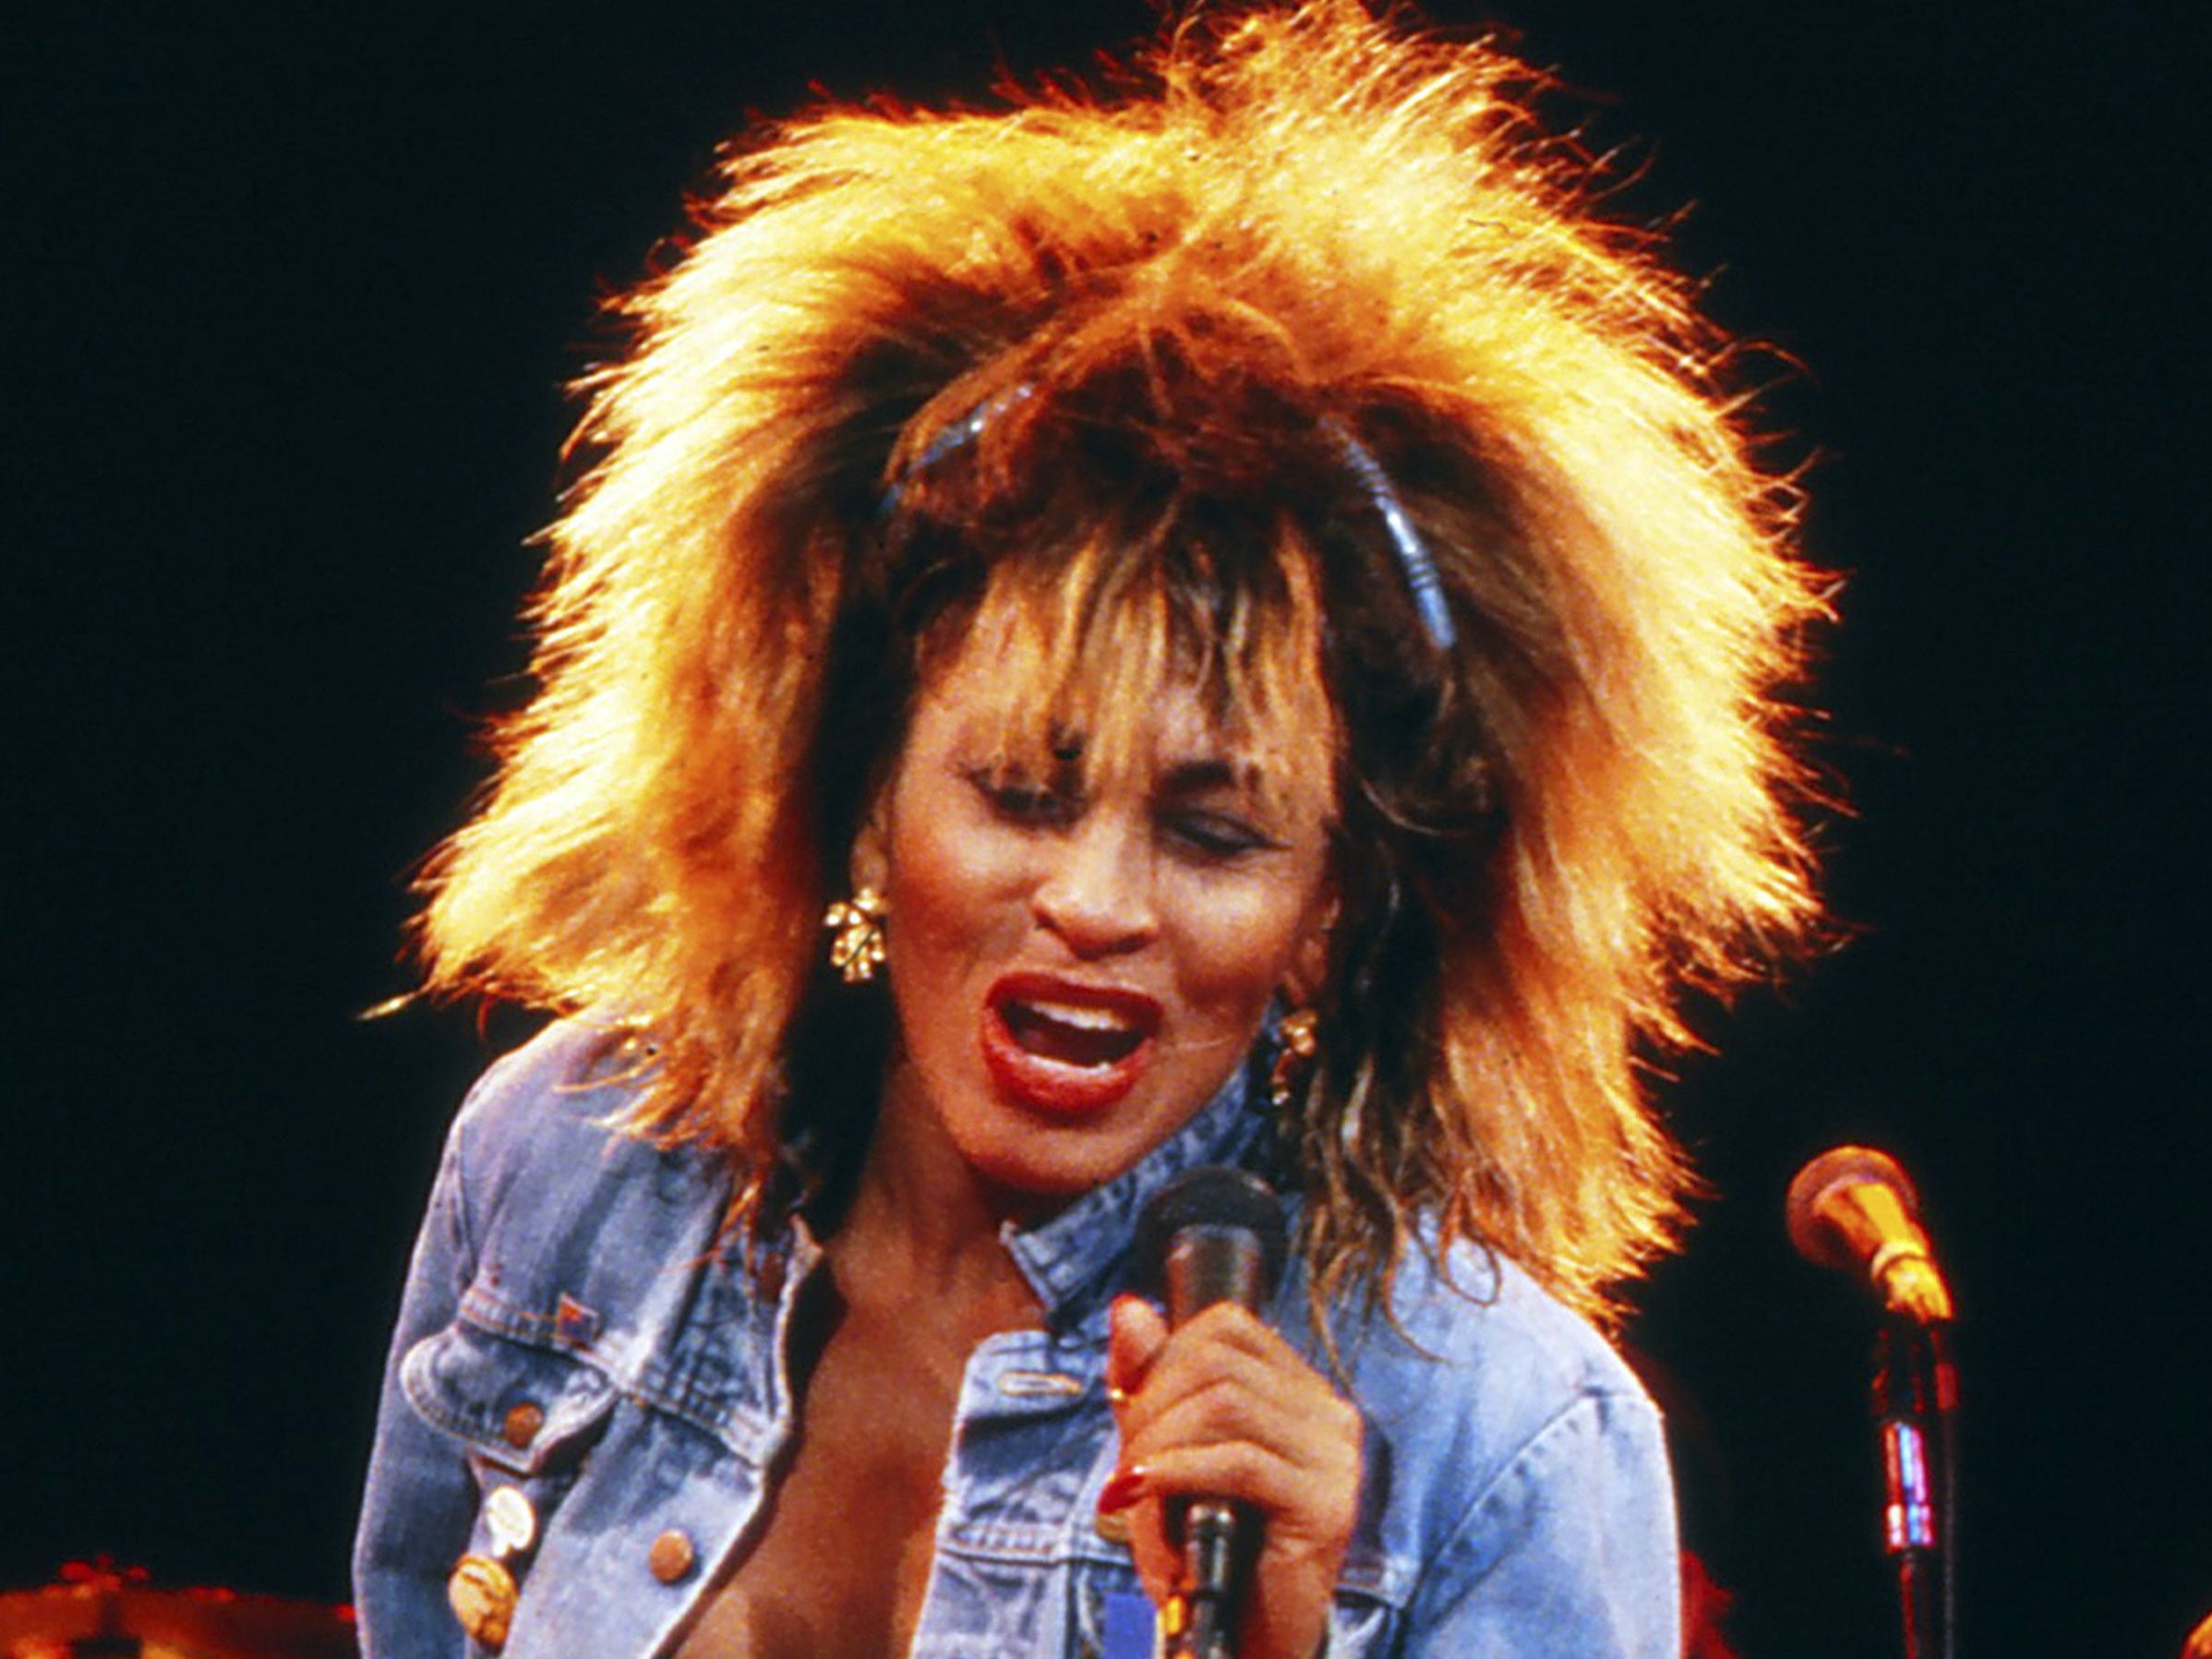 Under the stage name Tina Turner, she would become one of the most successful, celebrated and thunderous voices in R&B, soul, funk and pop music